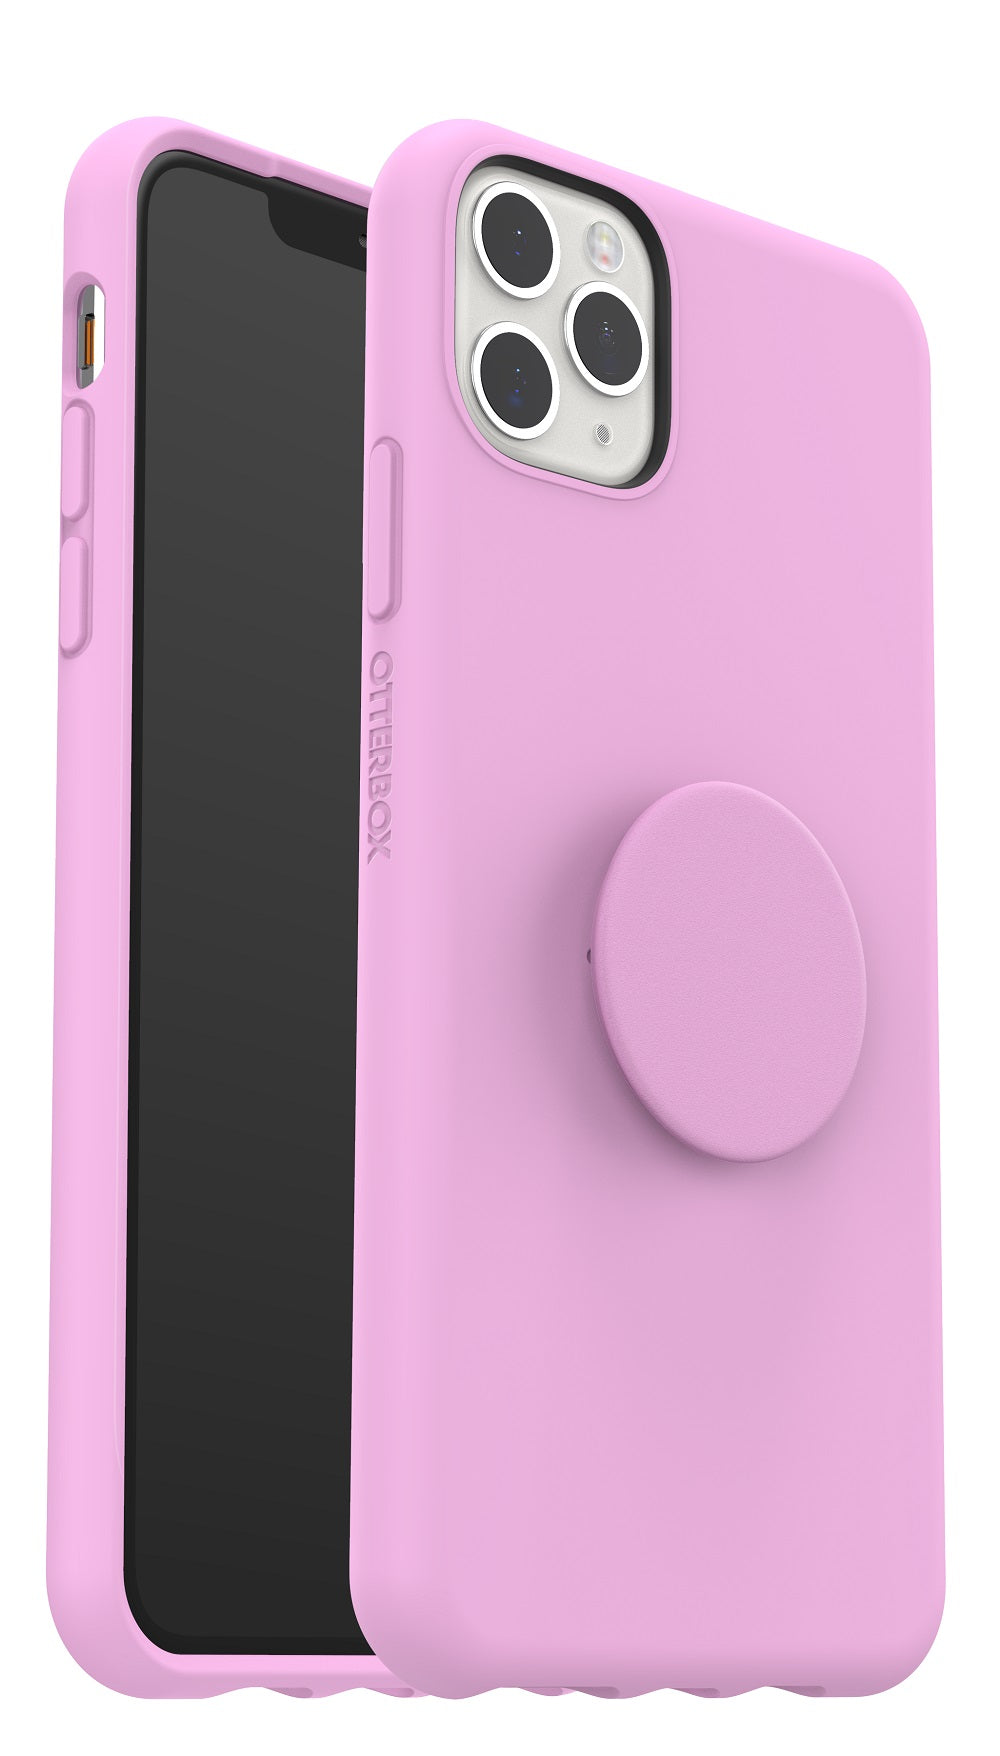 OtterBox + POP Ultra Slim Case for Apple iPhone 11 Pro Max - Lavender Sour (New)